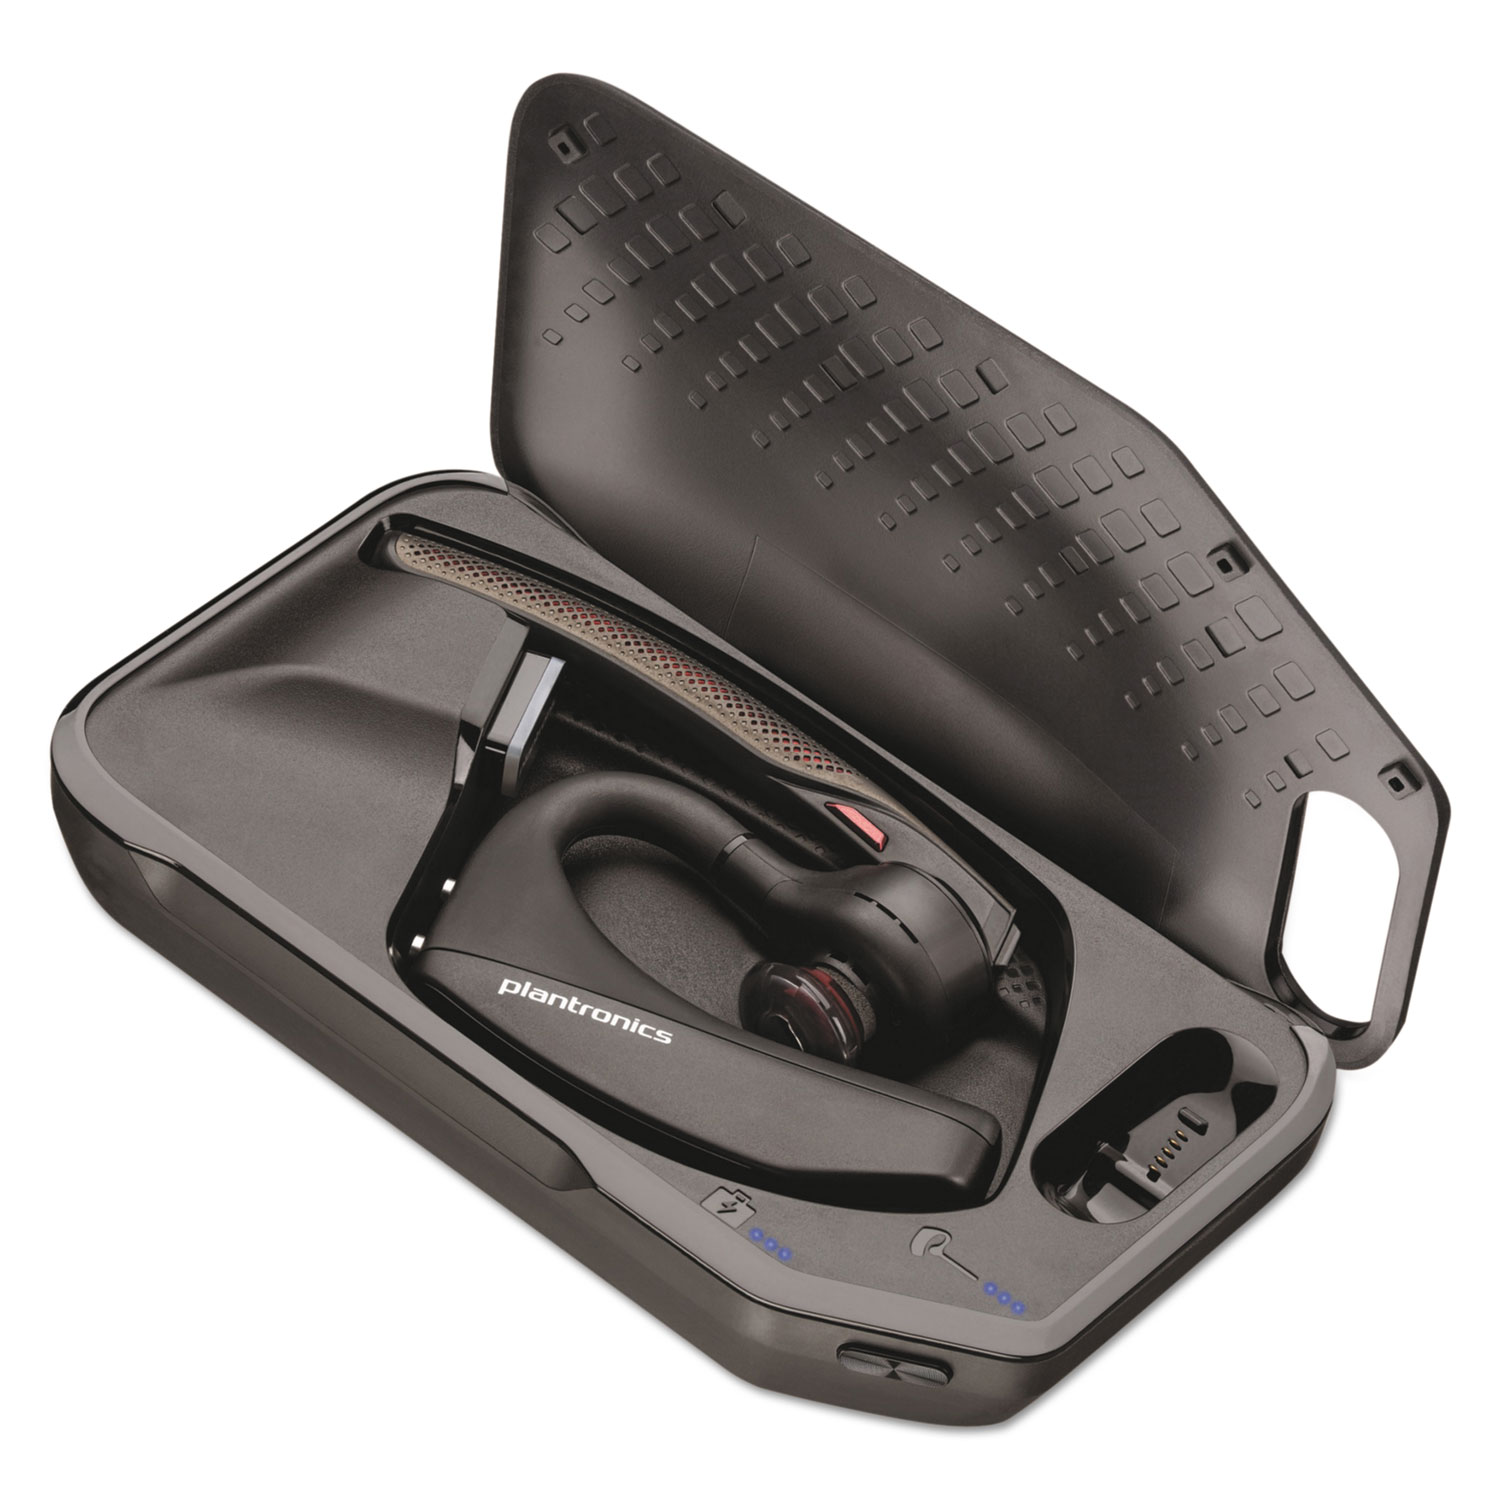 Voyager 5200 UC Monaural Over-the-Year Bluetooth Headset